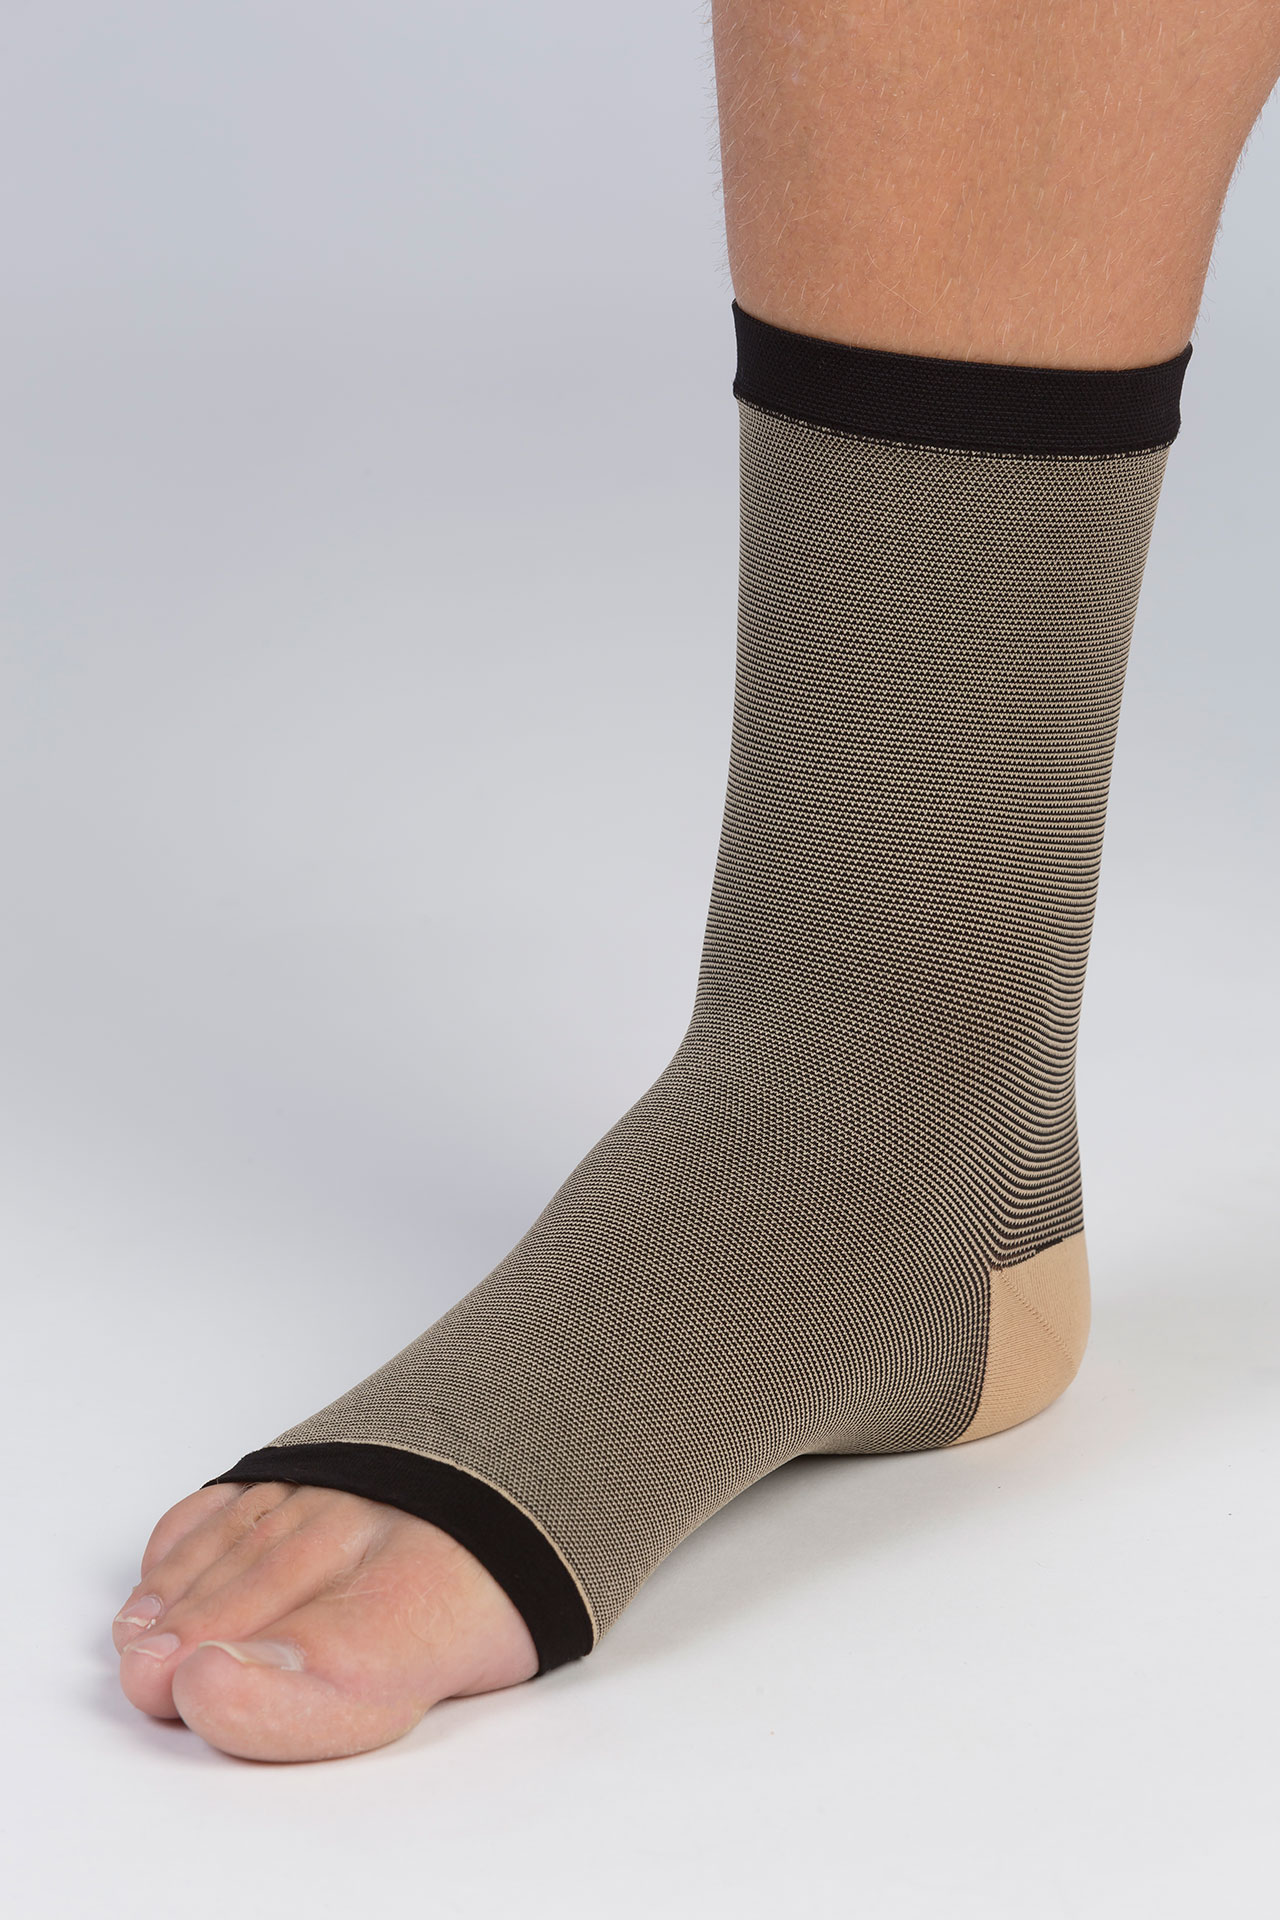 Medical Compression Products